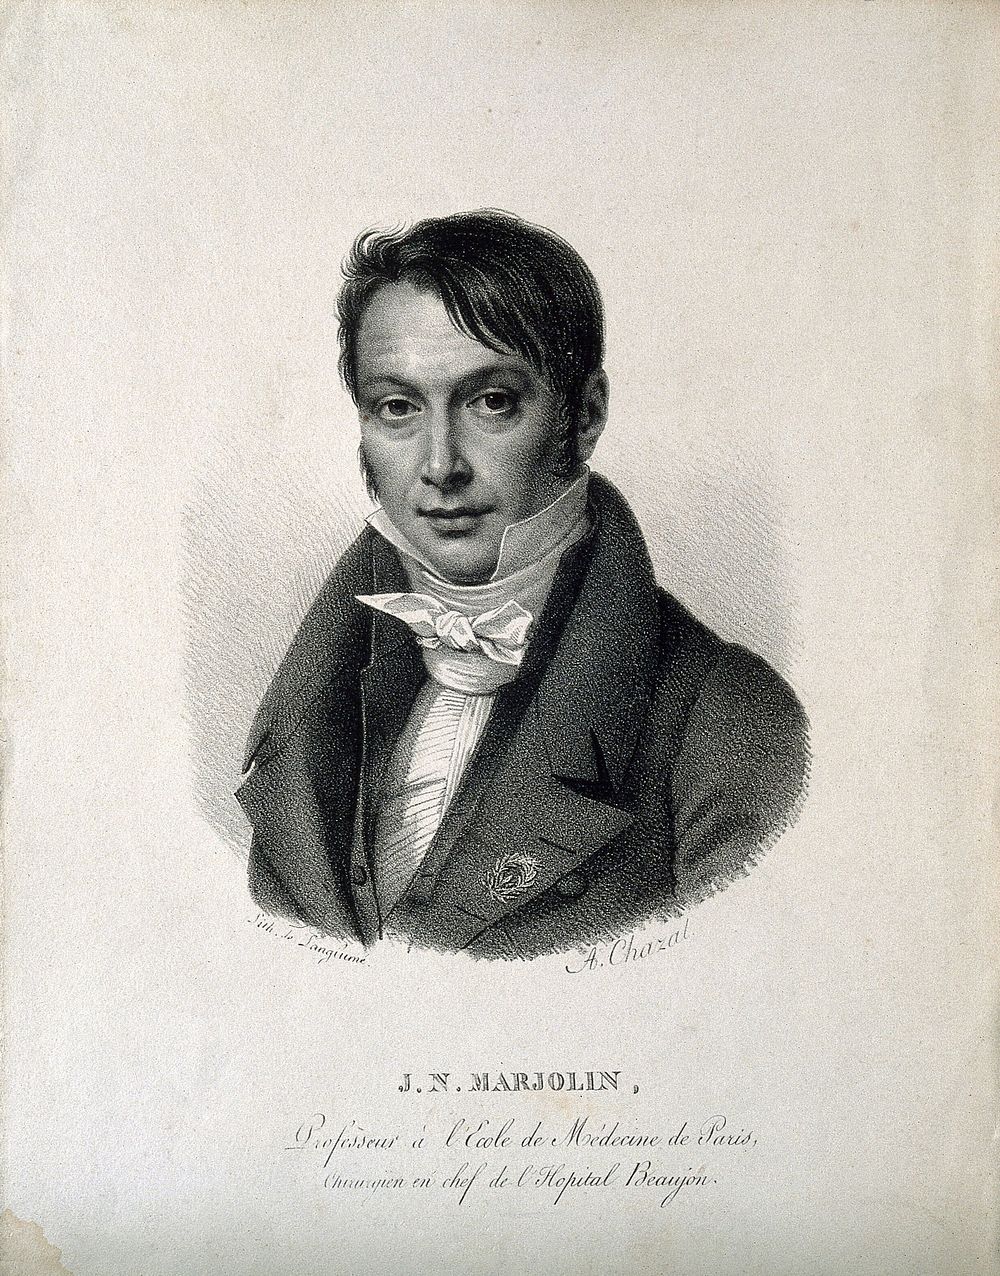 Jean Nicolas Marjolin. Lithograph by Langlumé after A. Chazal.